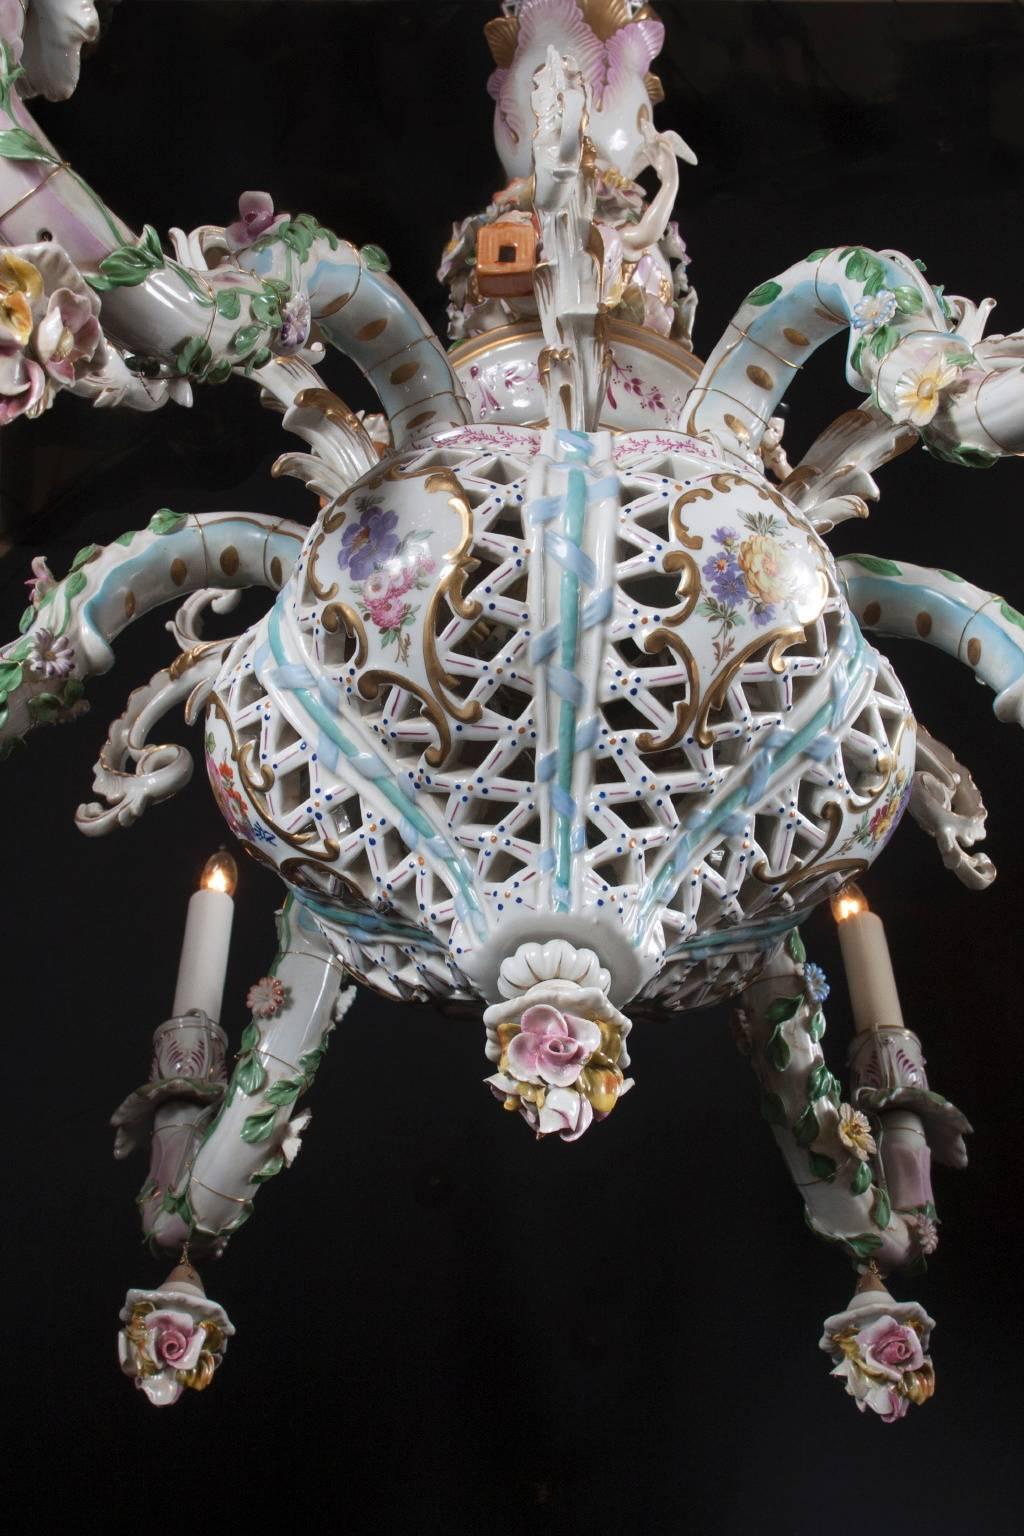 This beautiful chandelier is perfectly complemented by the matching pair of wall sconces. All three are Capodimonte porcelain, a style that directly emulated the German Meissen porcelain. Capodimonte is known for molded figurines and decorative